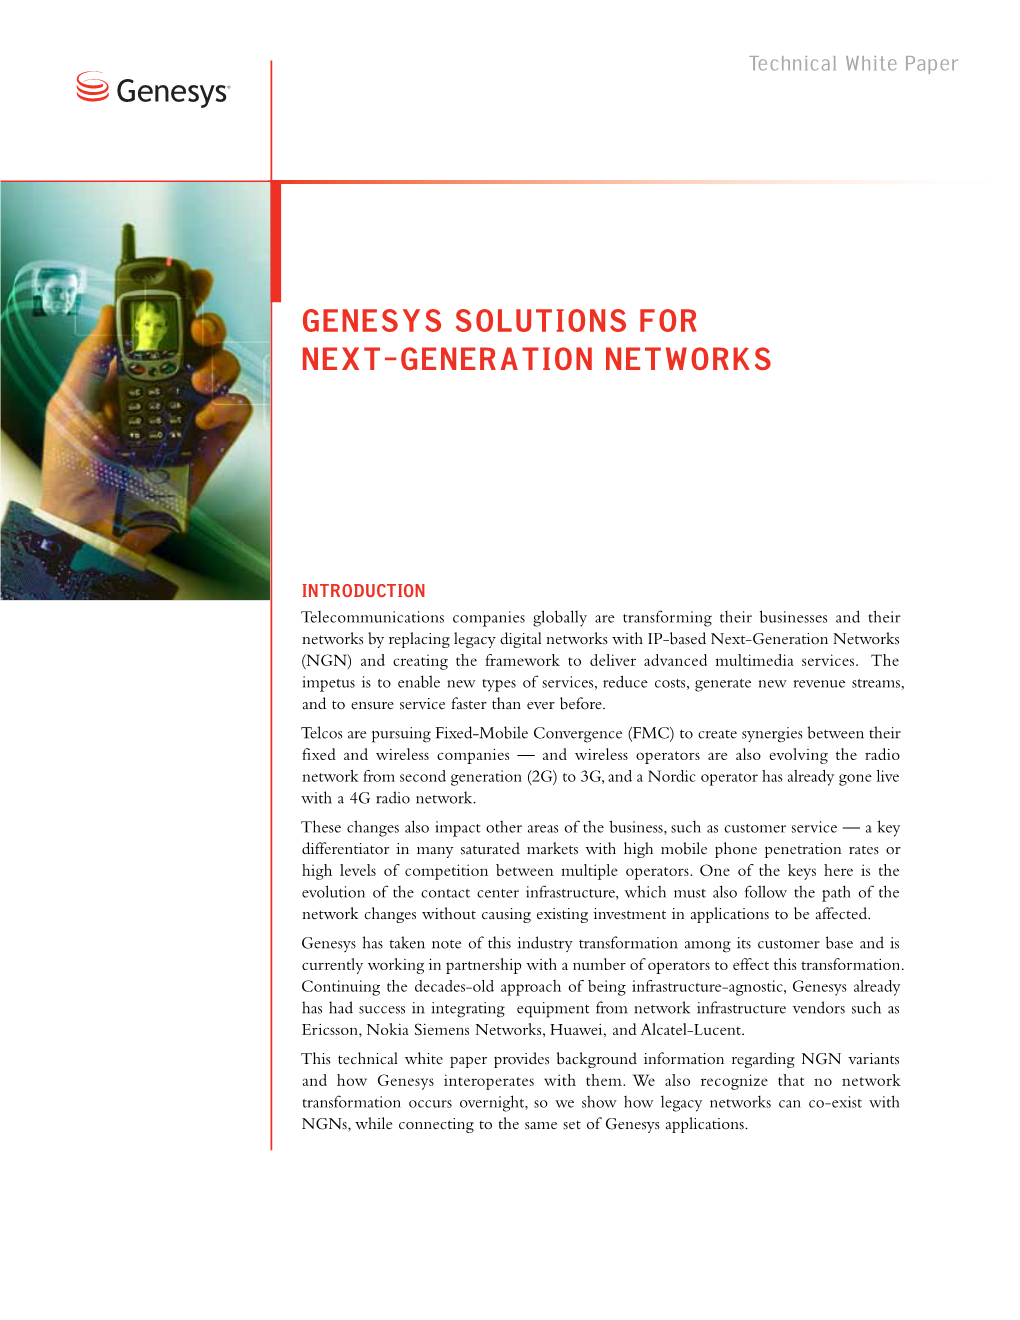 Genesys Solutions for Next-Generation Networks